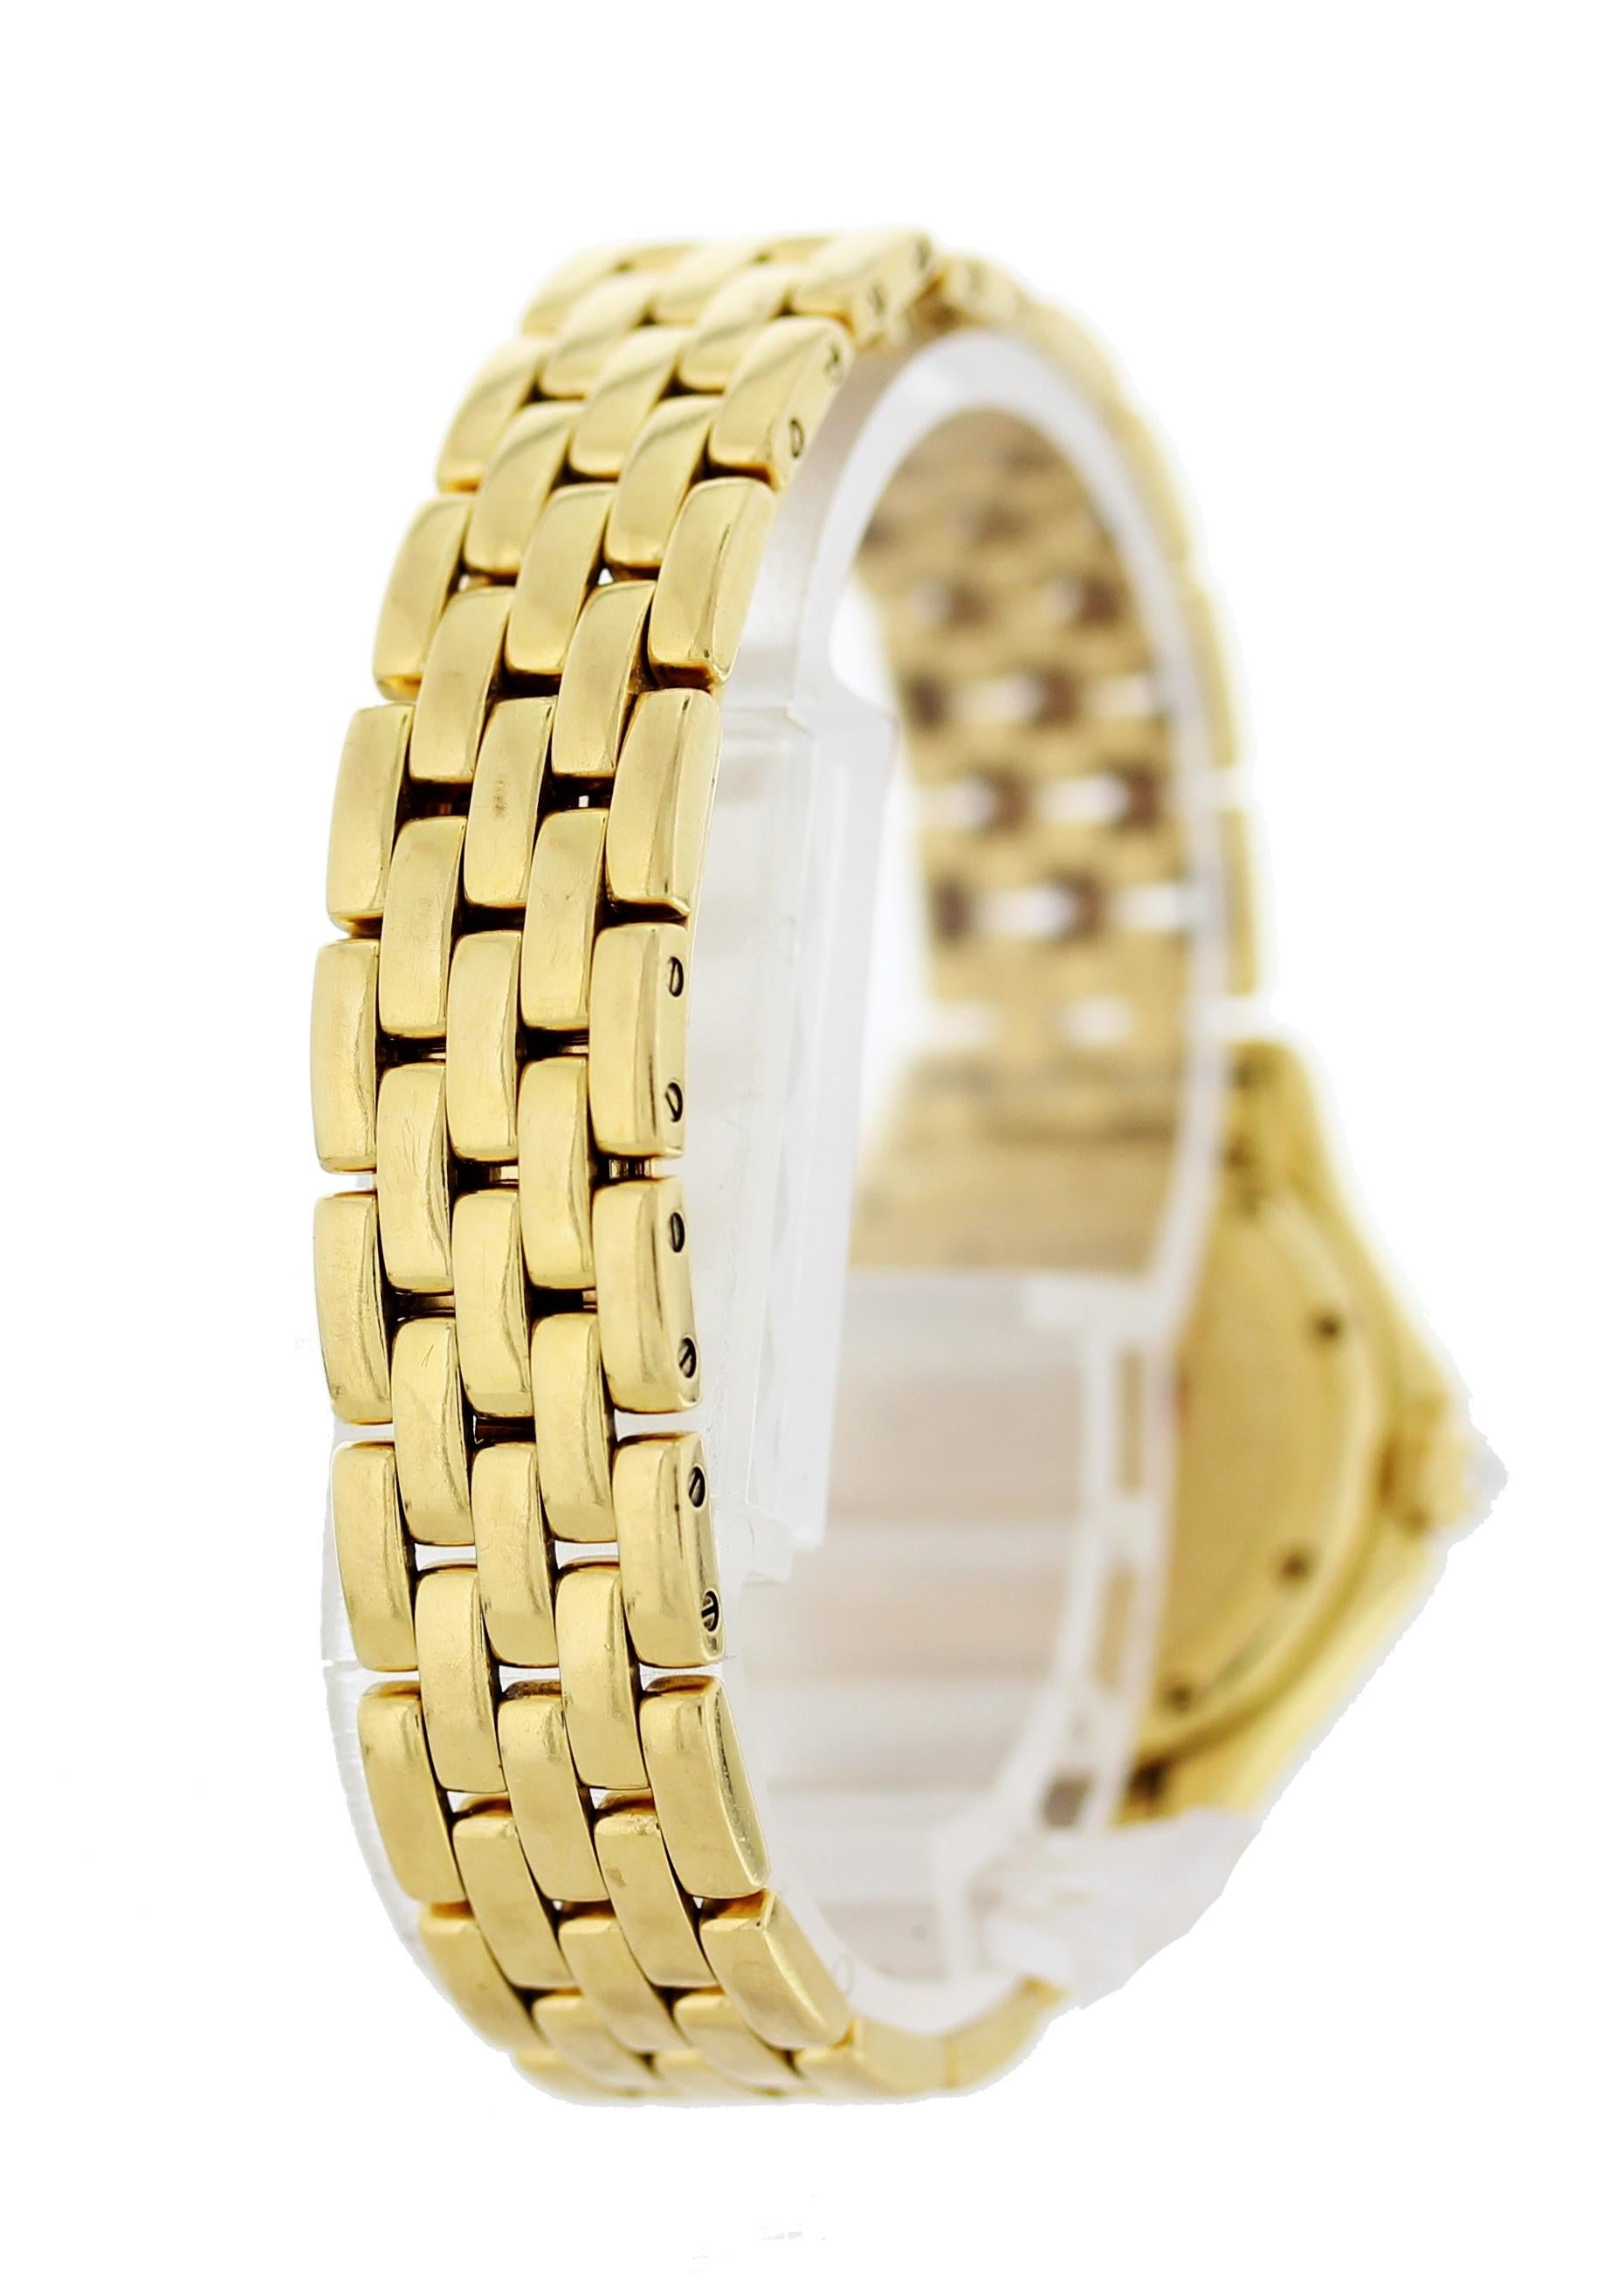 Cartier PanthÃ¨re Cougar 887907 18 Karat Yellow Gold Watch In Excellent Condition For Sale In New York, NY